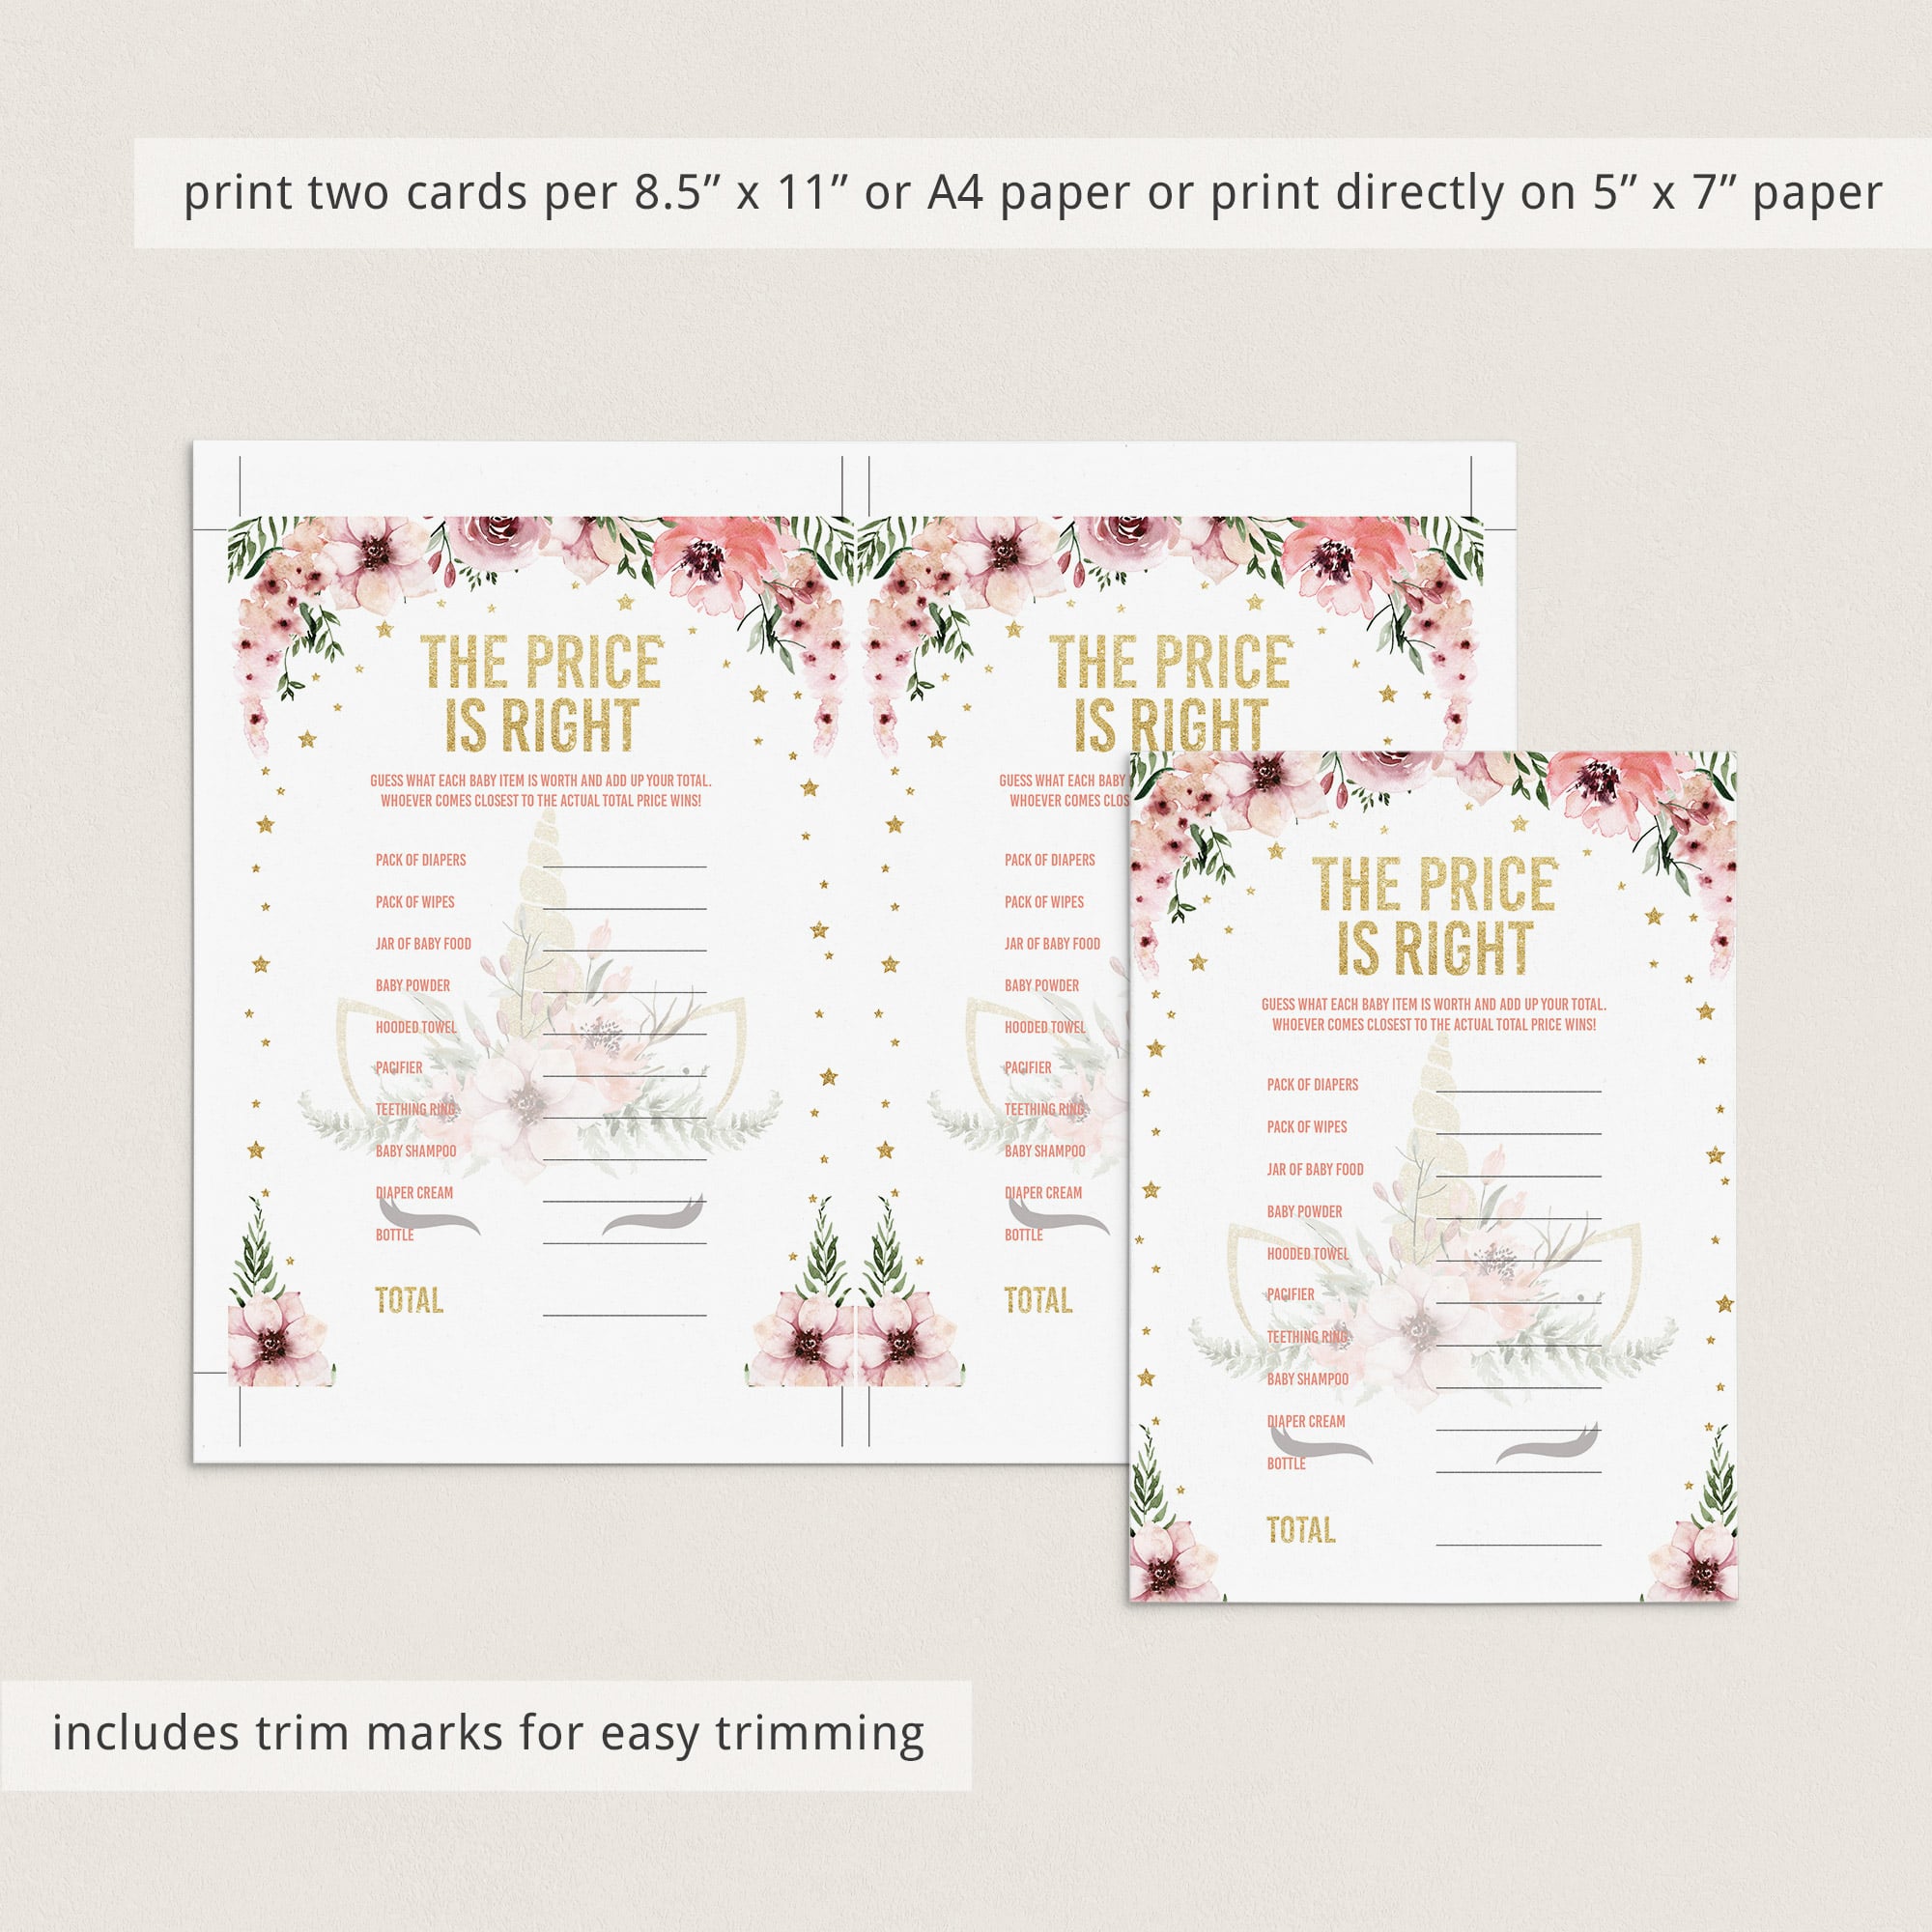 Price is right game cards for unicorn themed babyshower by LittleSizzle